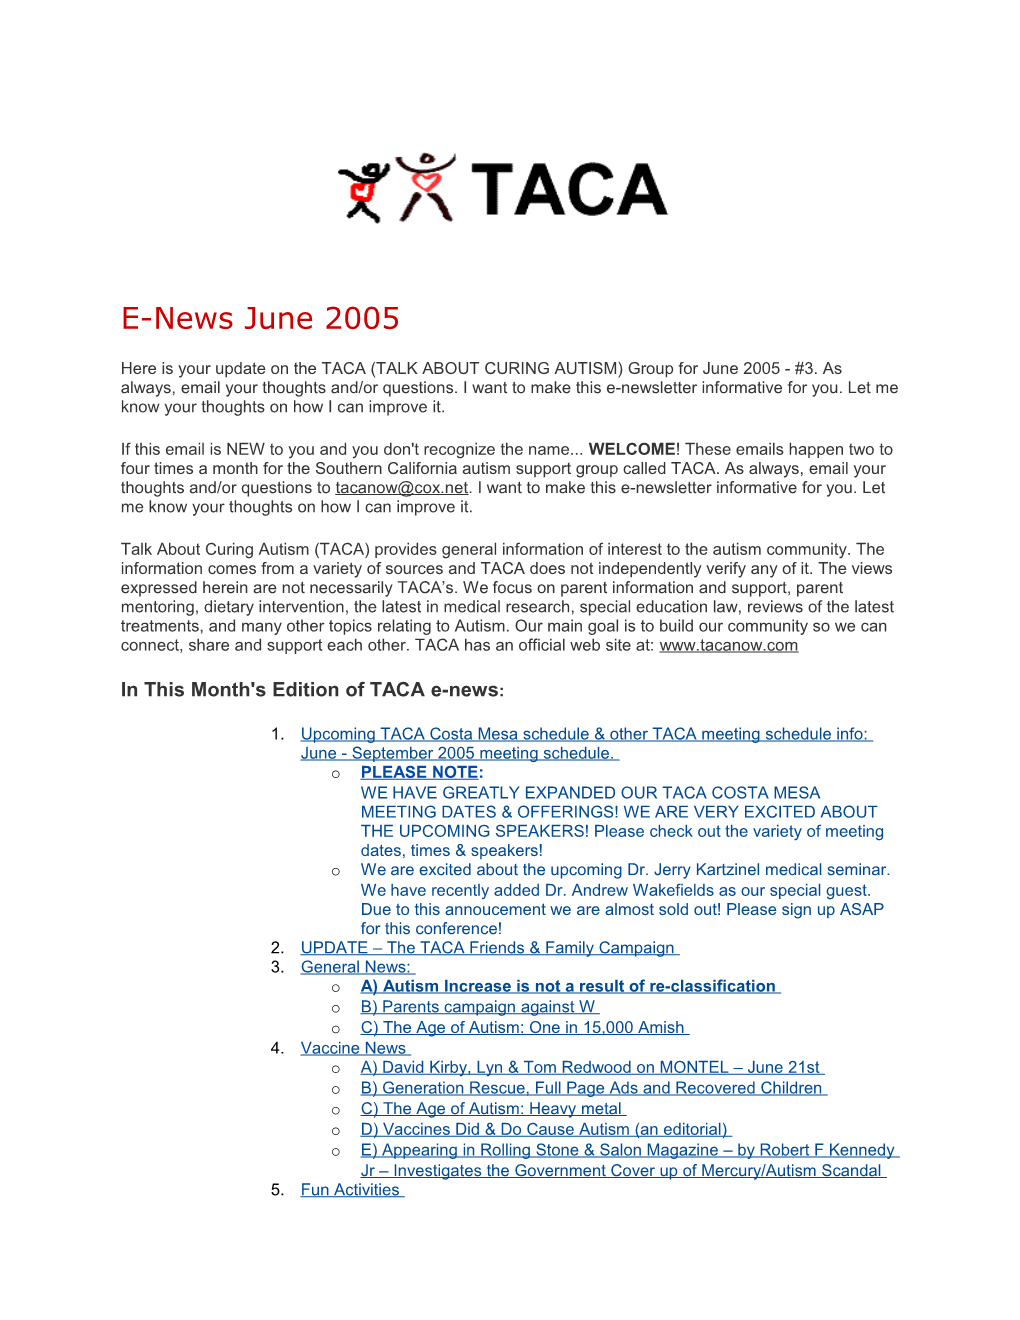 In This Month's Edition of TACA E-News s2